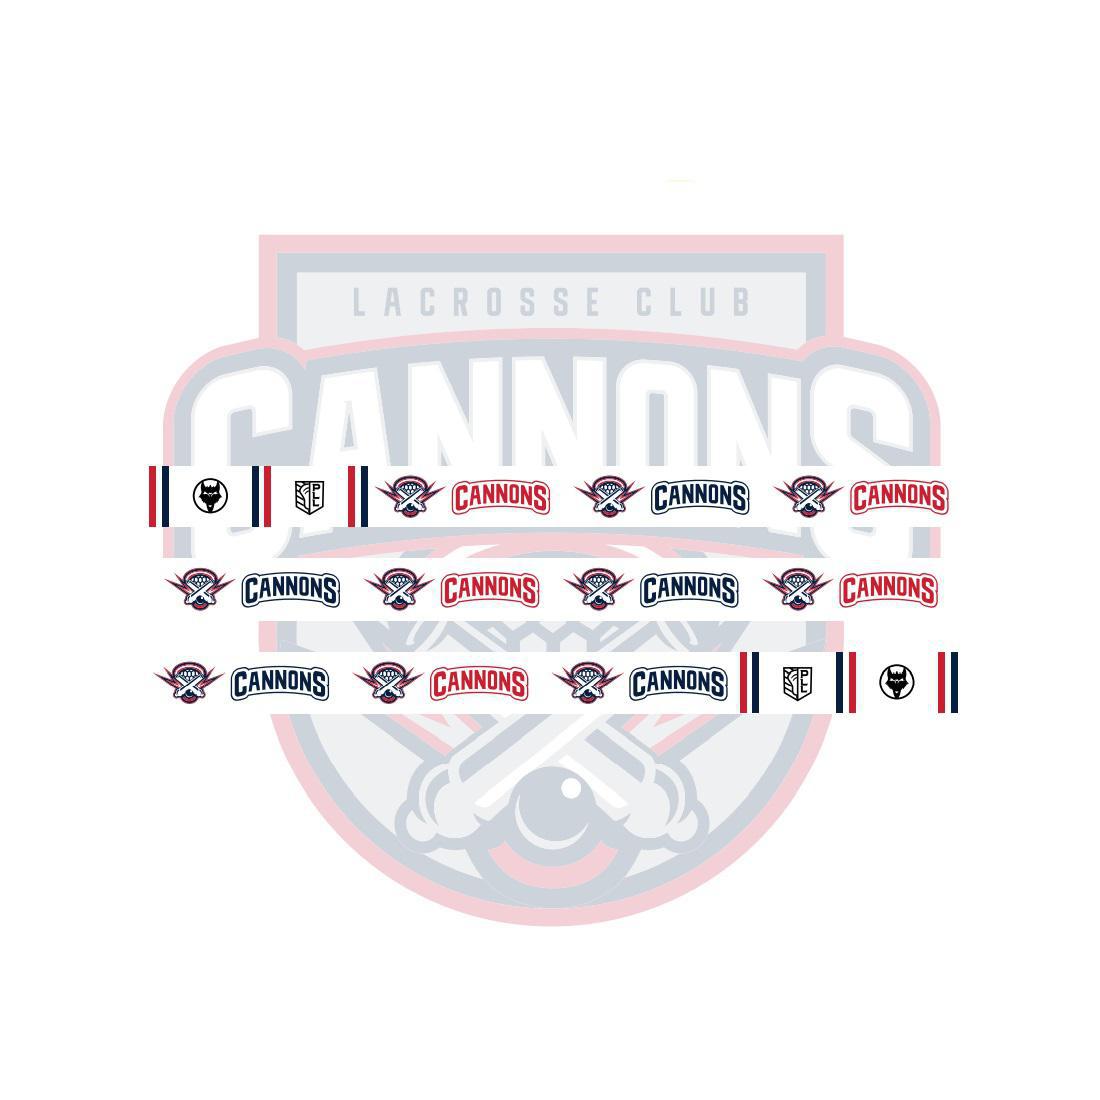 Official Lacrosse Grip Tape of the PLL- Cannons lacrosse, Lax grip tape for PLL